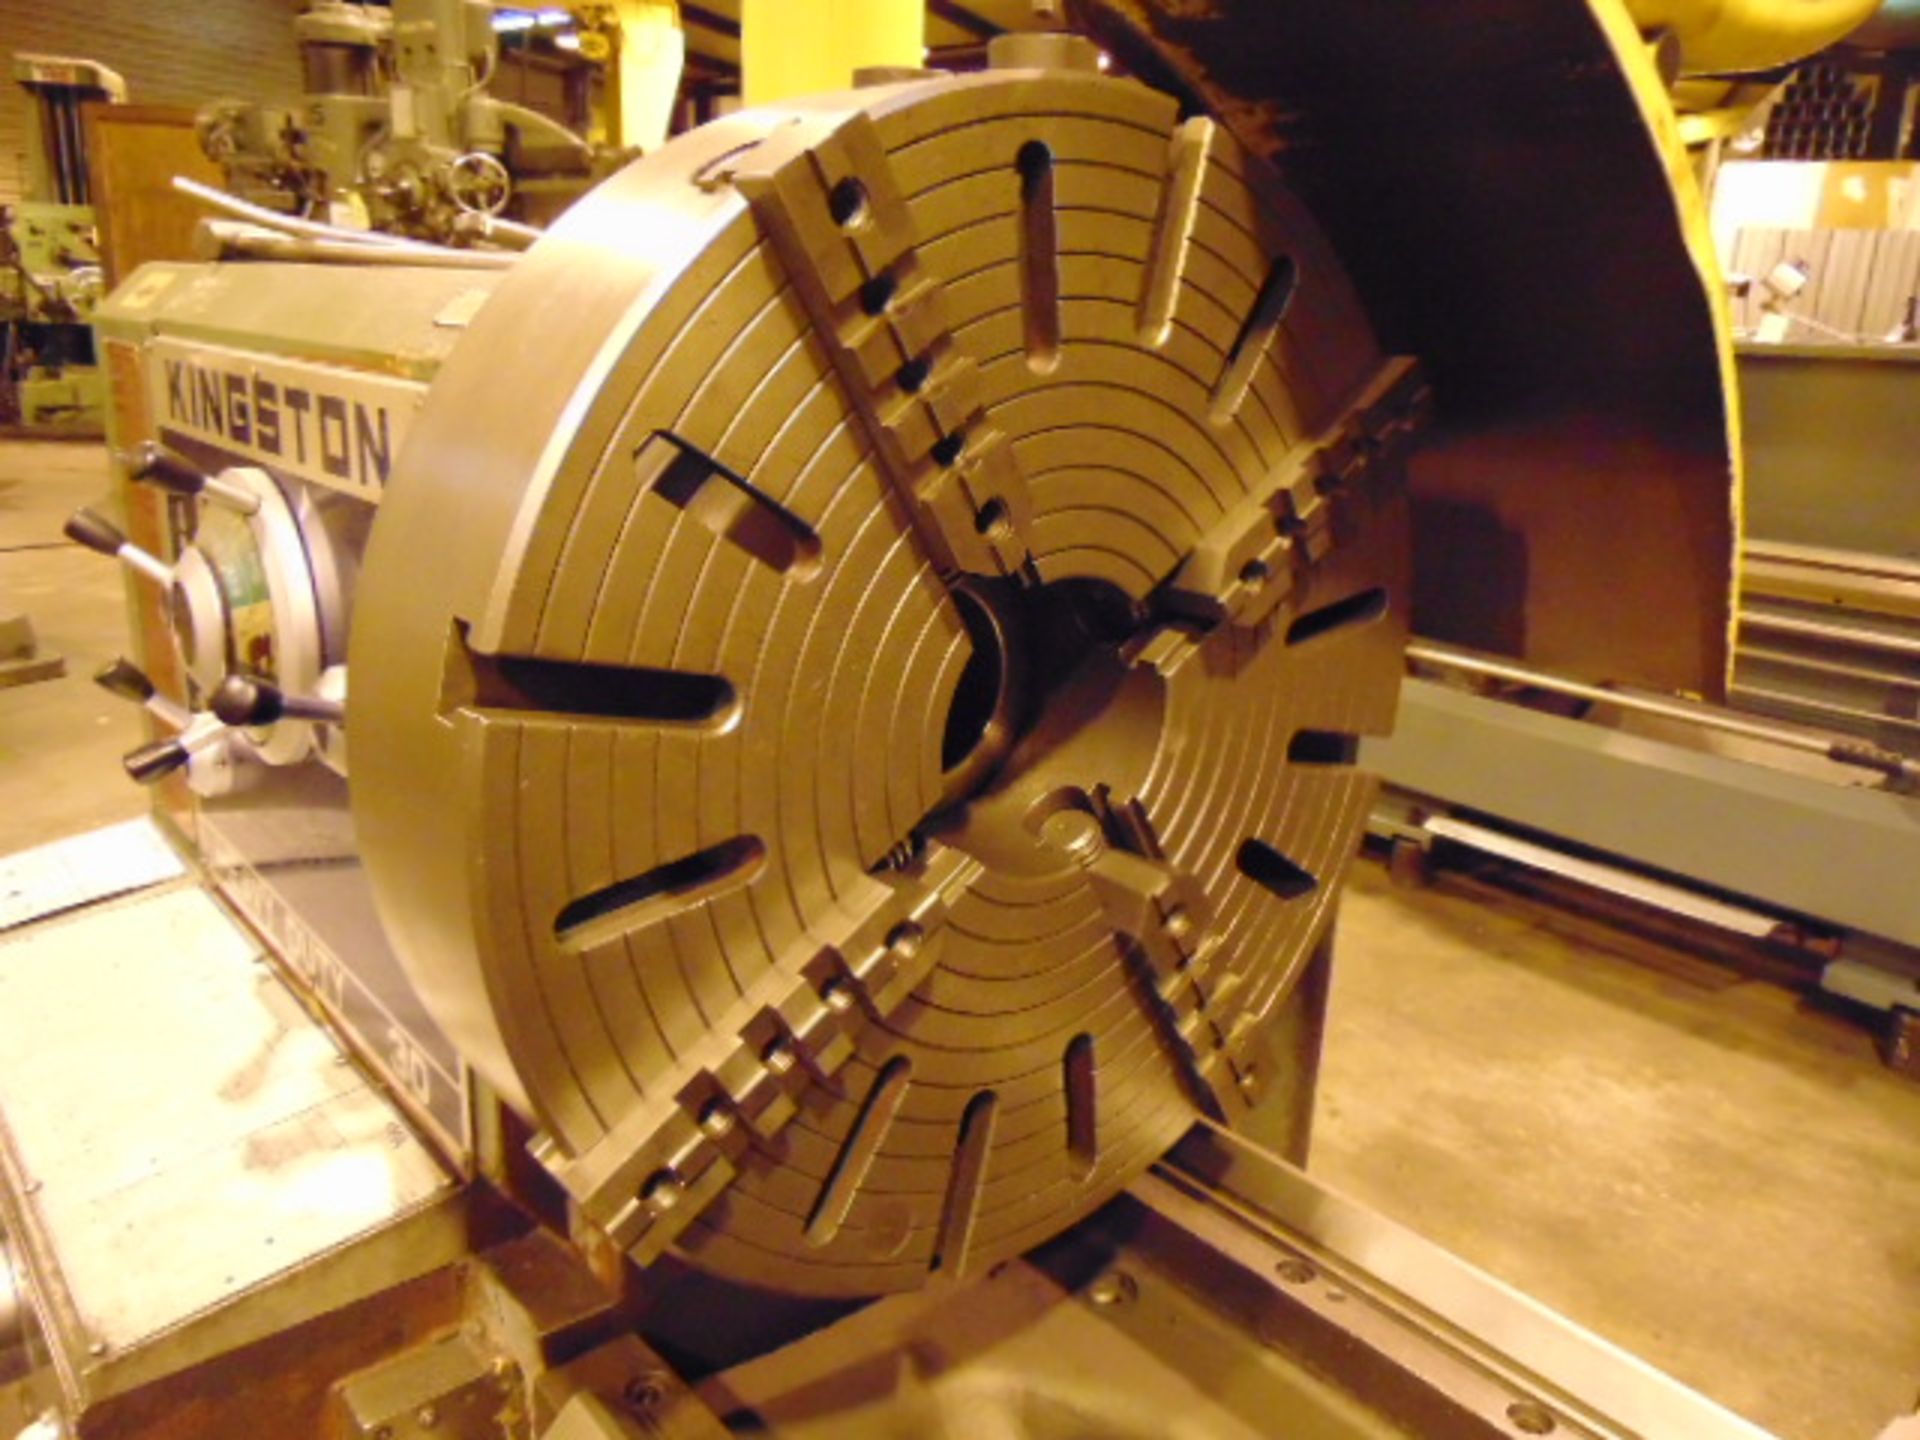 GAP BED ENGINE LATHE, KINGSTON 30” X 80” MDL. HR2000 HEAVY DUTY, new 1996, 24-3/4” dia. 4-jaw chuck, - Image 3 of 17